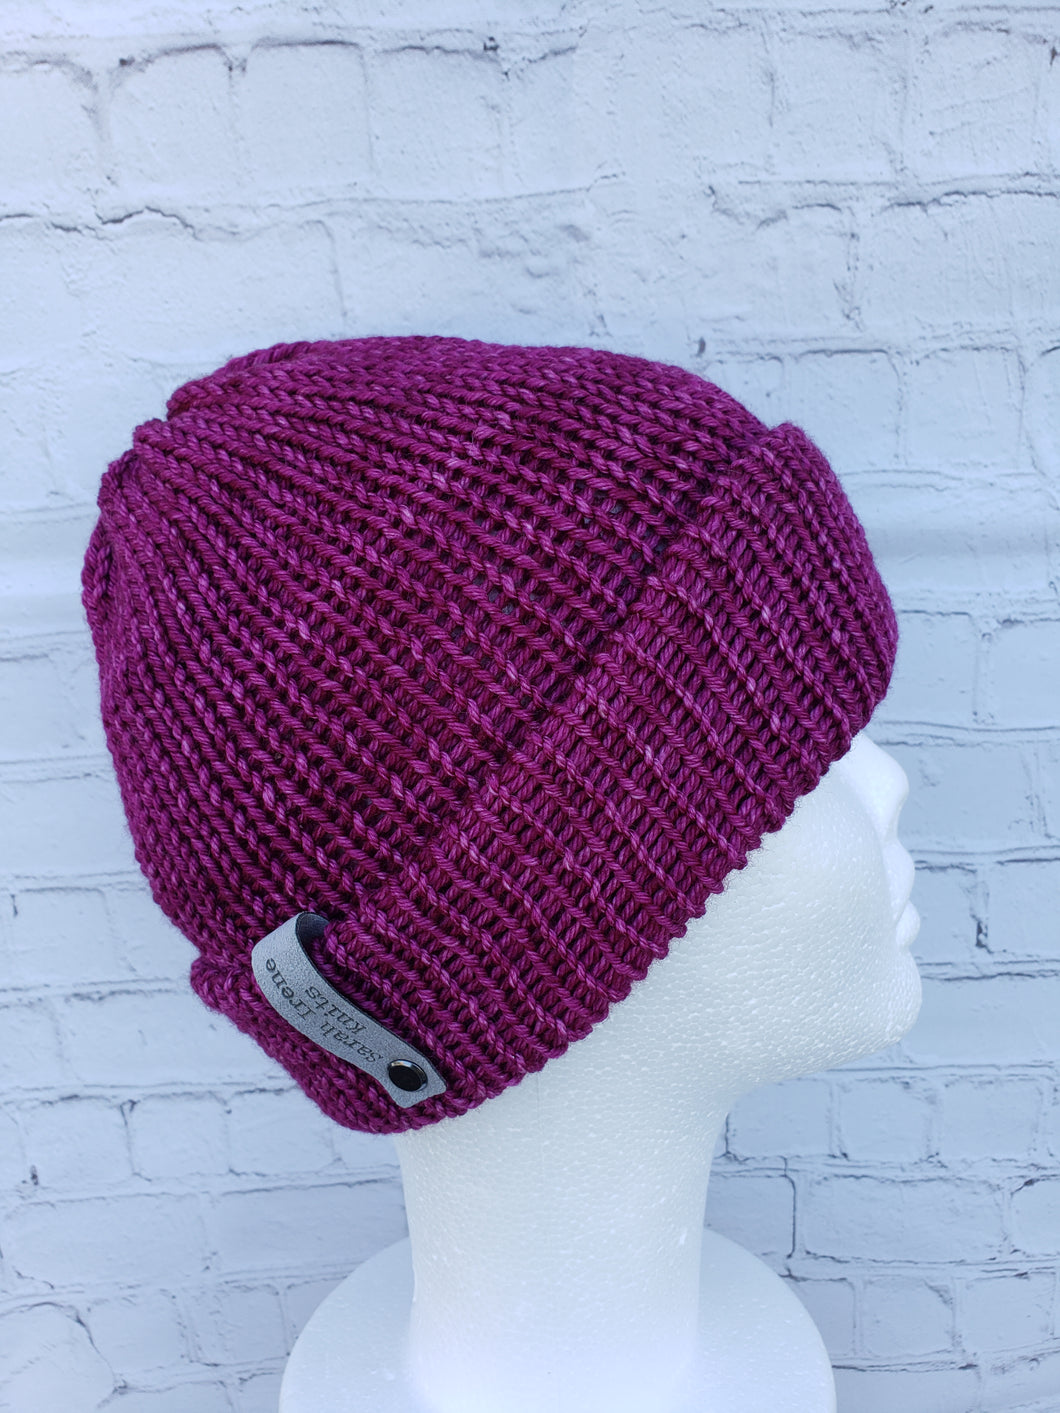 Double brim beanie in a reddish pink color. No pom.